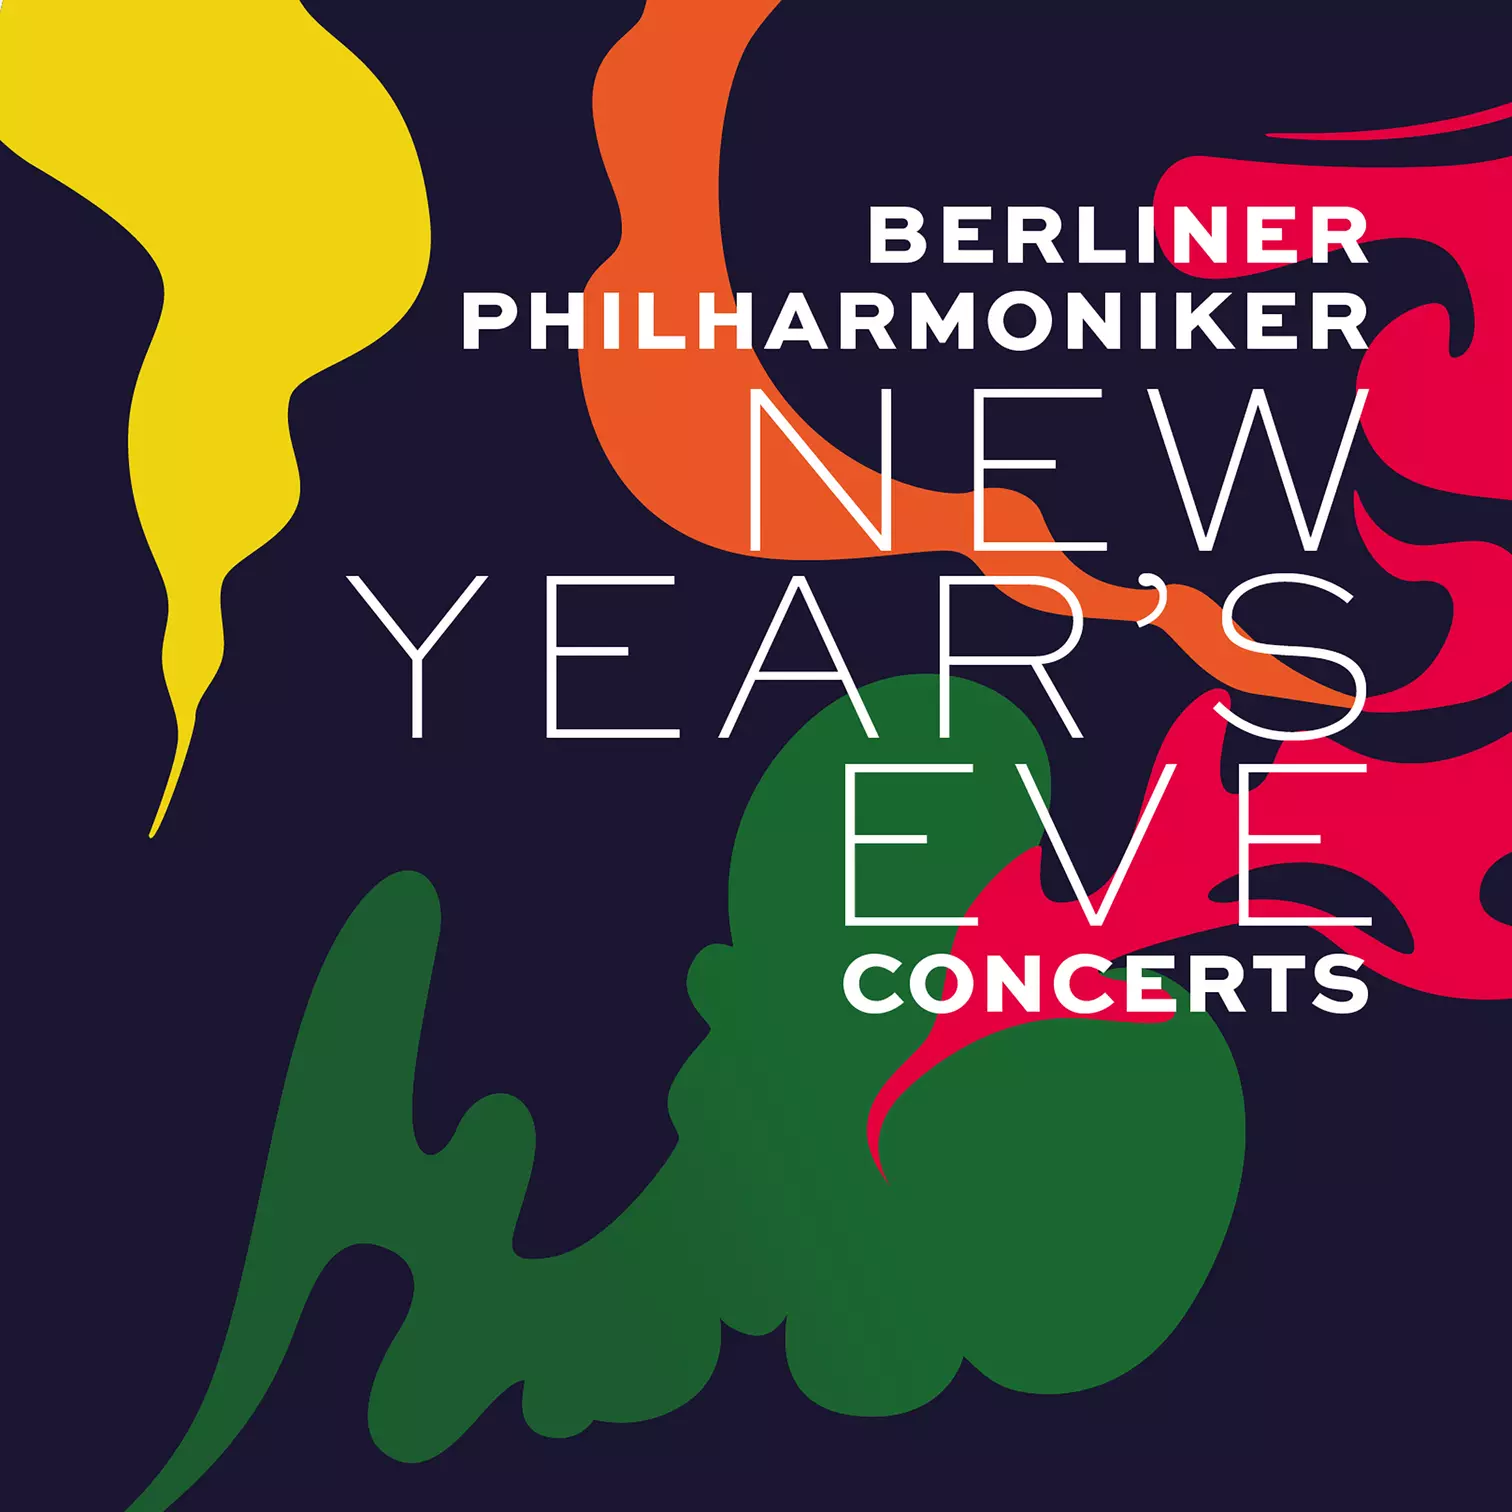 New Year’s Eve Concerts - Concerts between 1977 and 2019